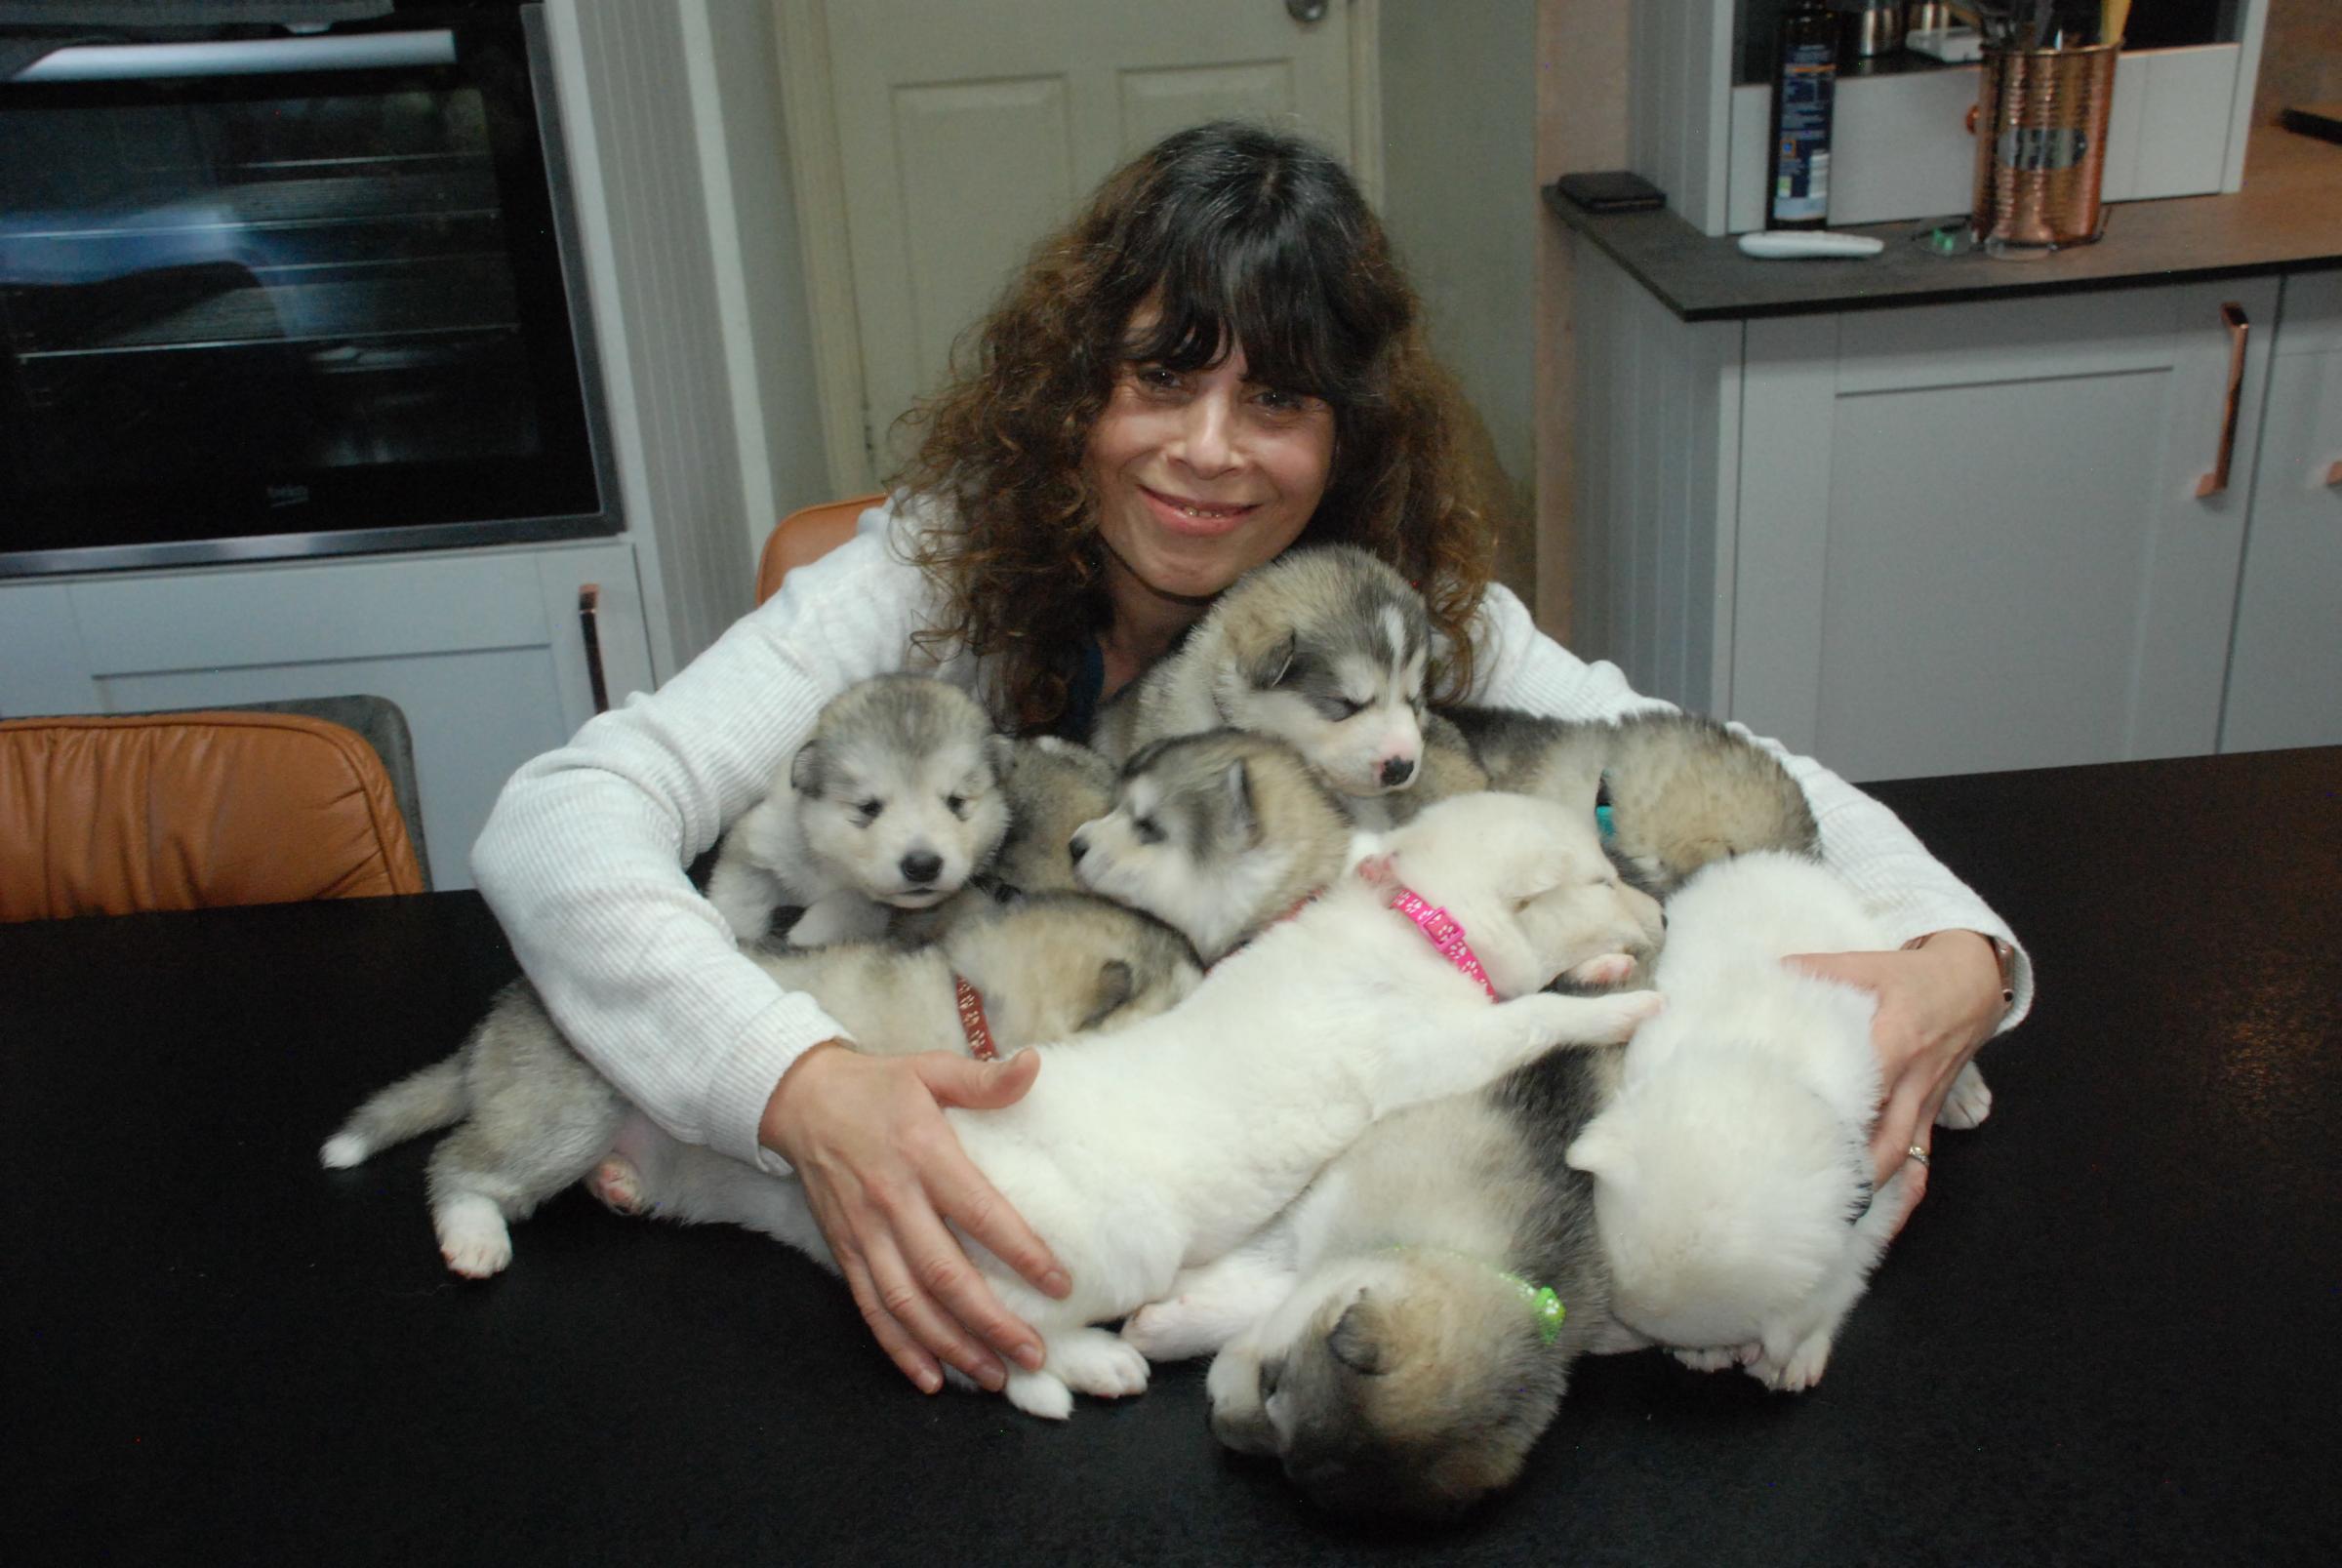 Gulin Milne with some of the puppies. Image: SWNS